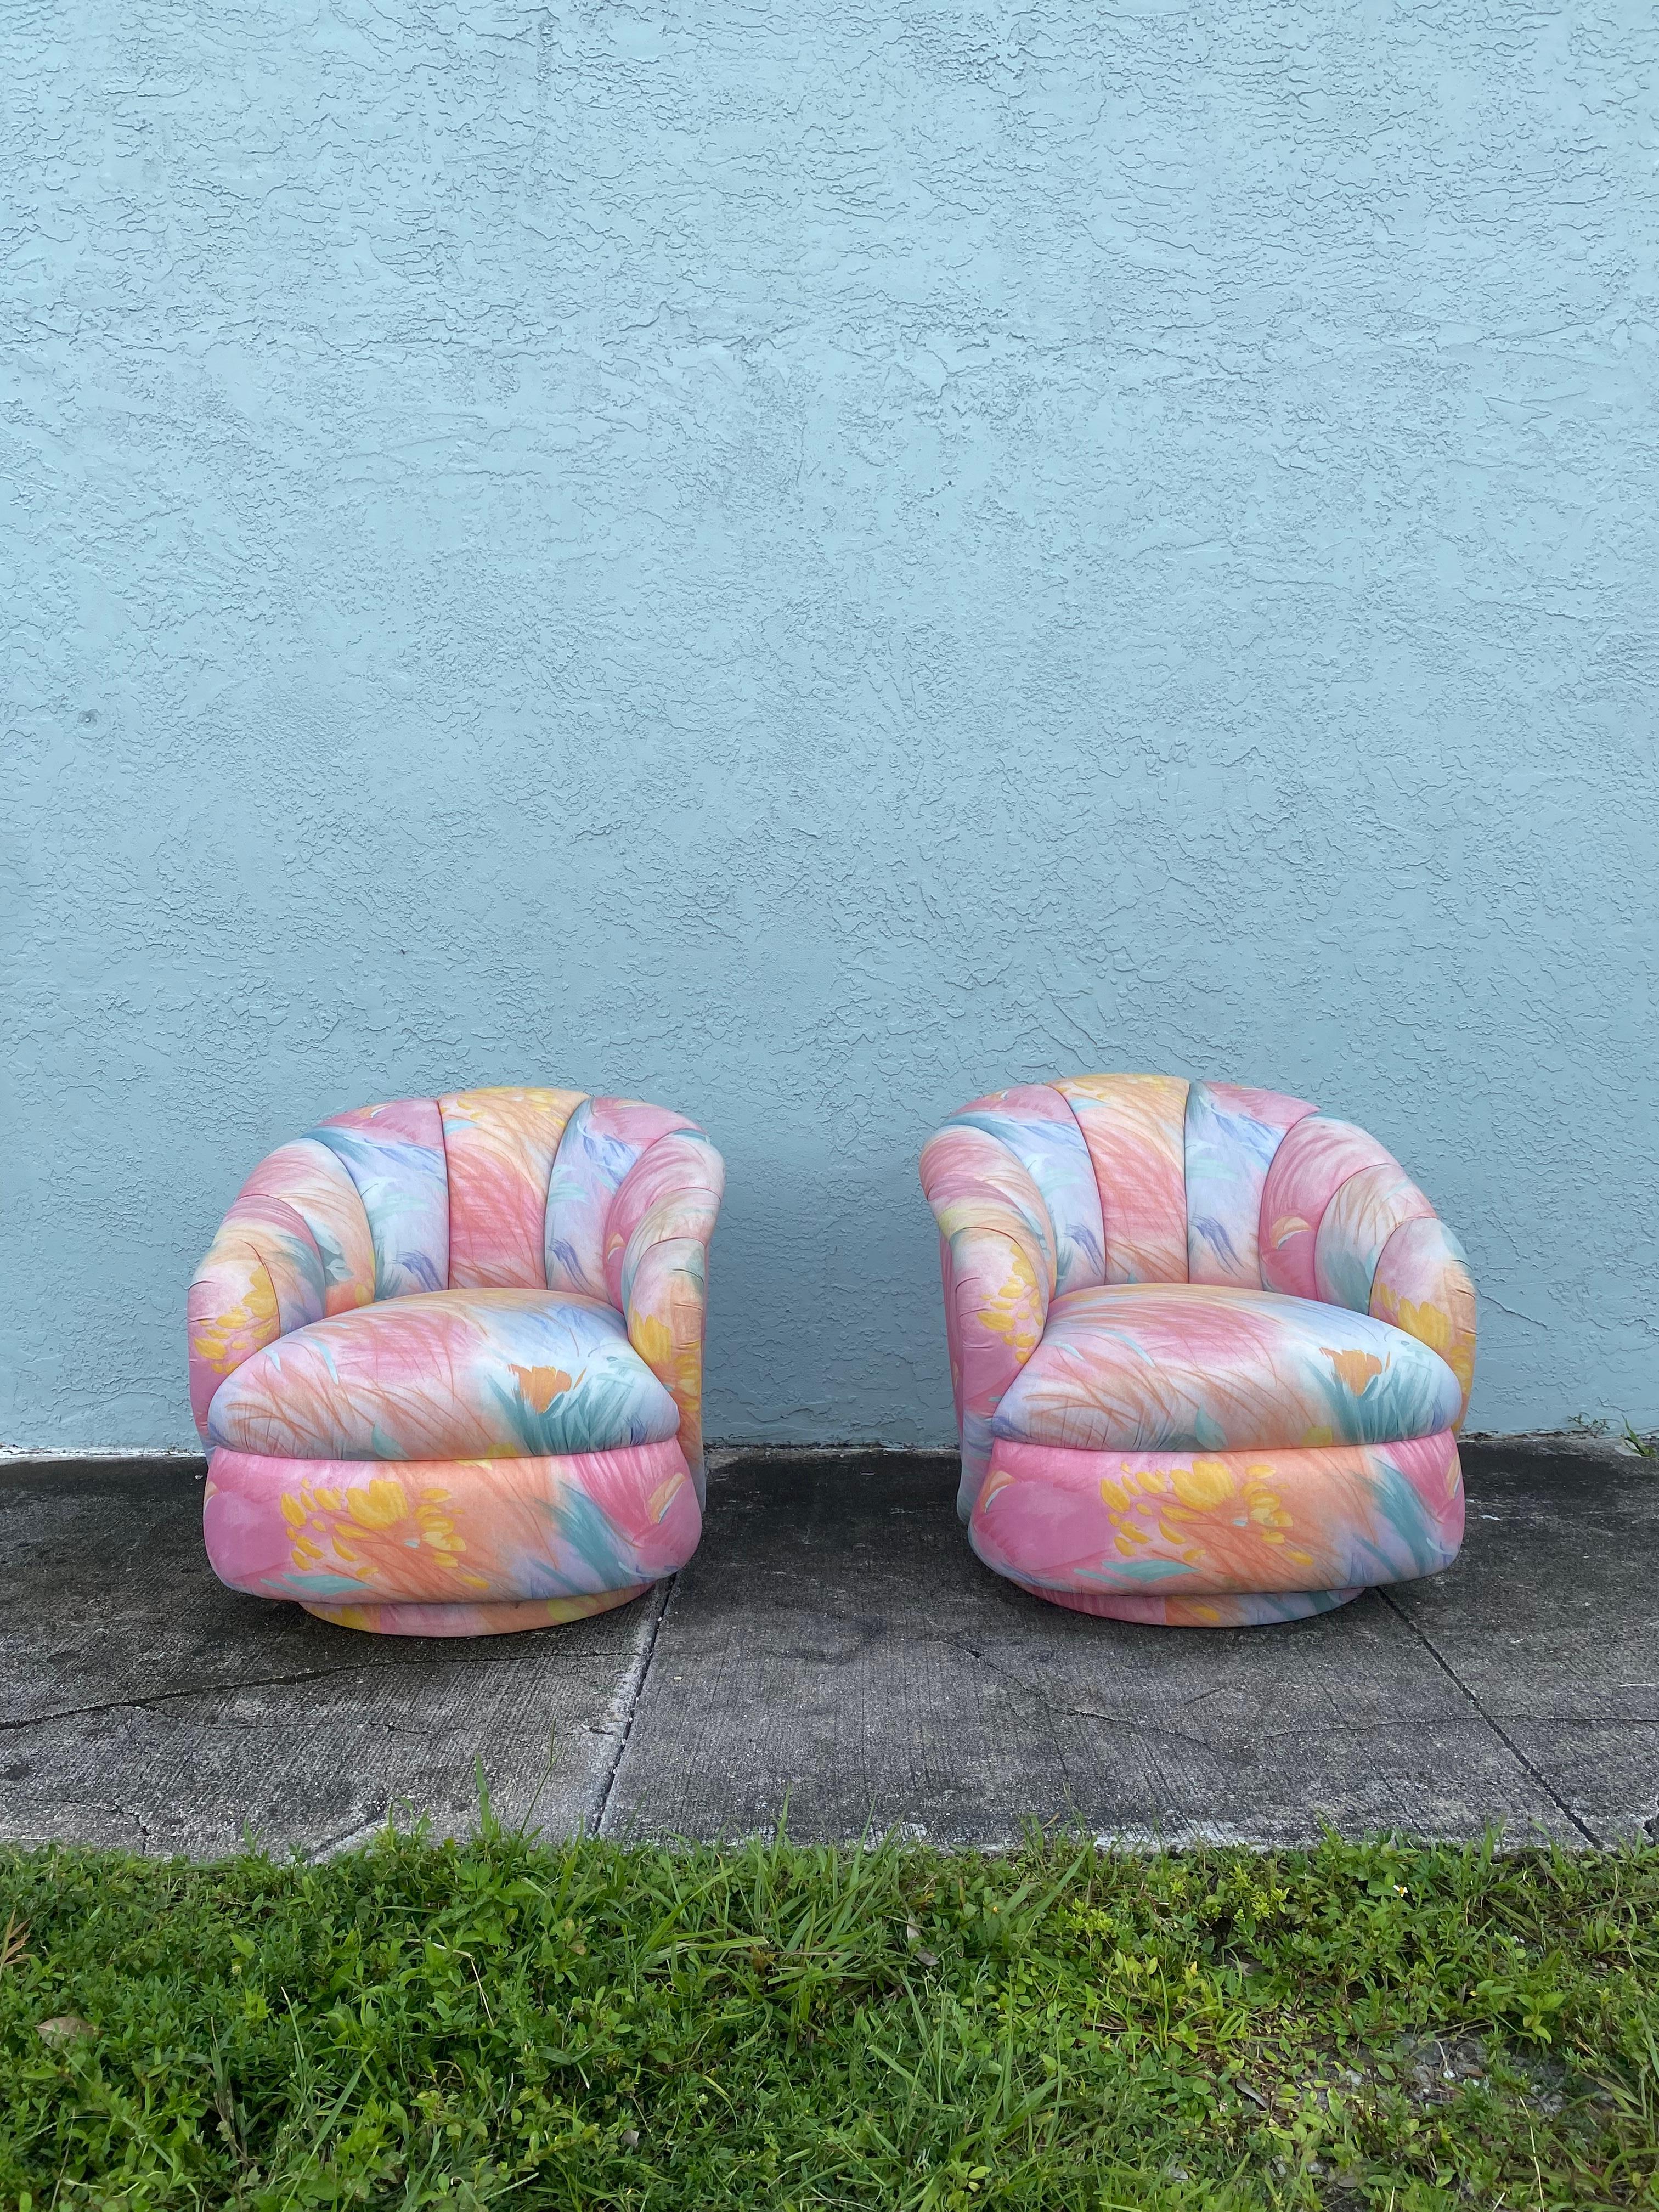 On offer on this occasion is one of the most stunning, satin like Floral swivel chairs you could hope to find. Outstanding design is exhibited throughout. Tight firm cushioning and an exceptionally deep seat lend inviting comfort to the elegant and